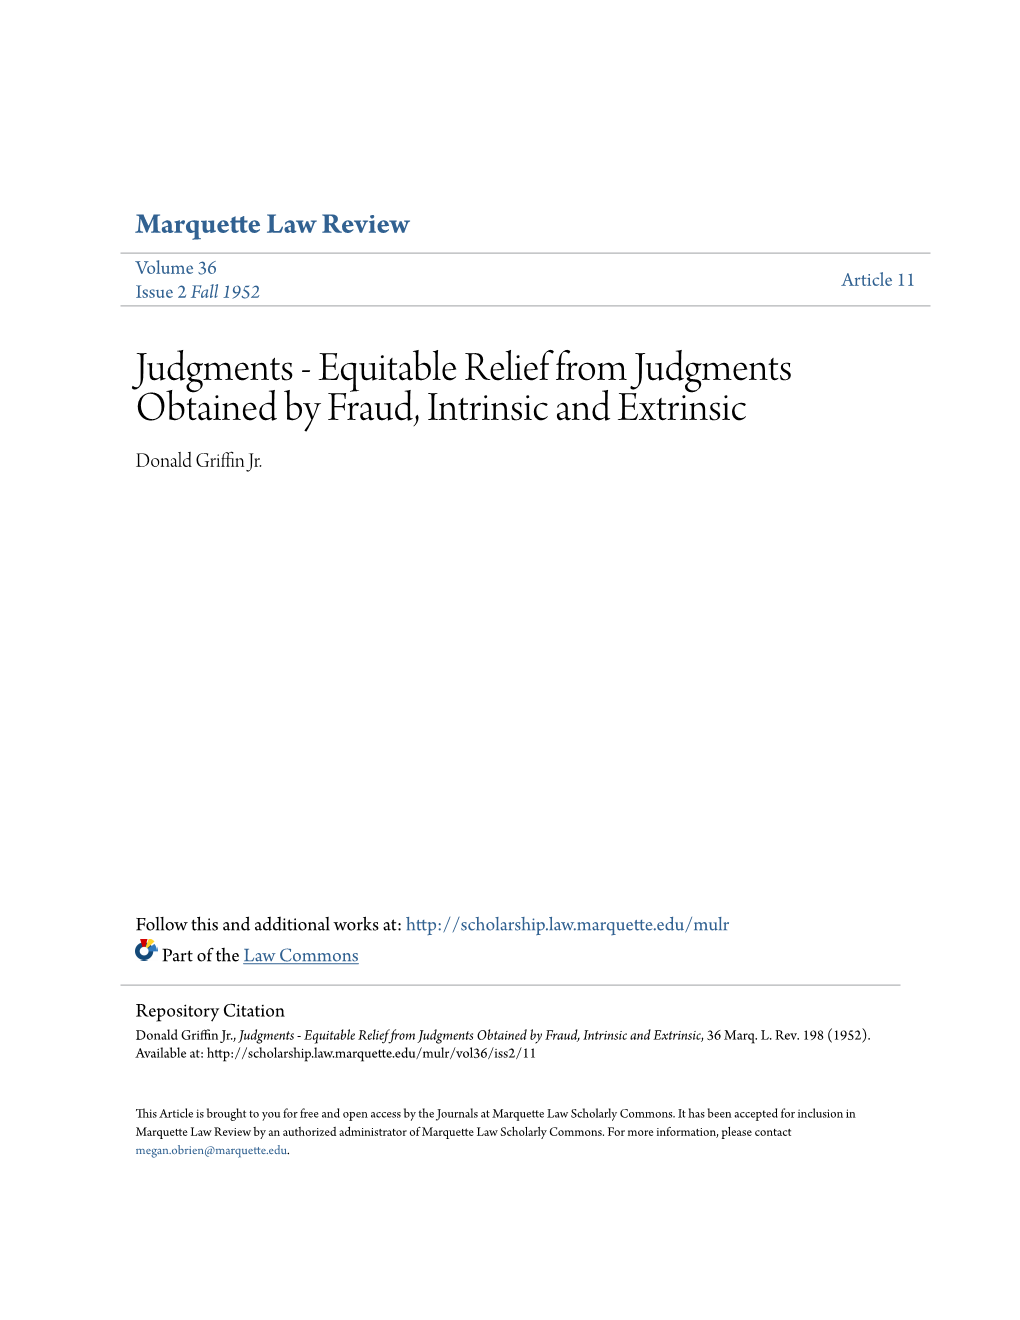 Equitable Relief from Judgments Obtained by Fraud, Intrinsic and Extrinsic Donald Griffinr J